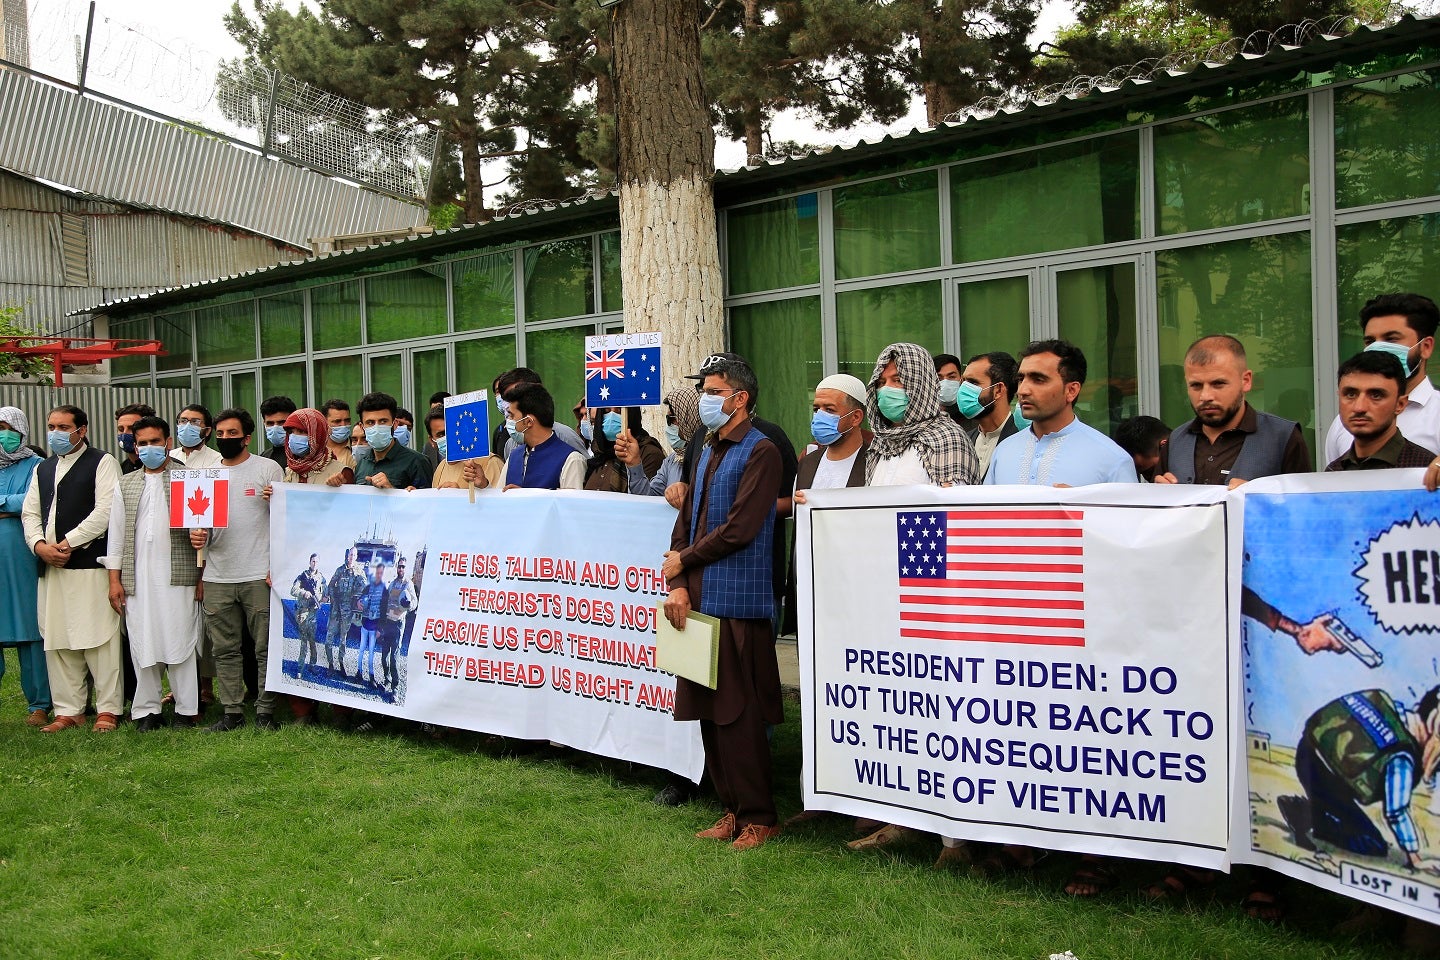 Former Afghan interpreters hold placards during a protest against the U.S. government and NATO in Kabul, Afghanistan on April 30, 2021.